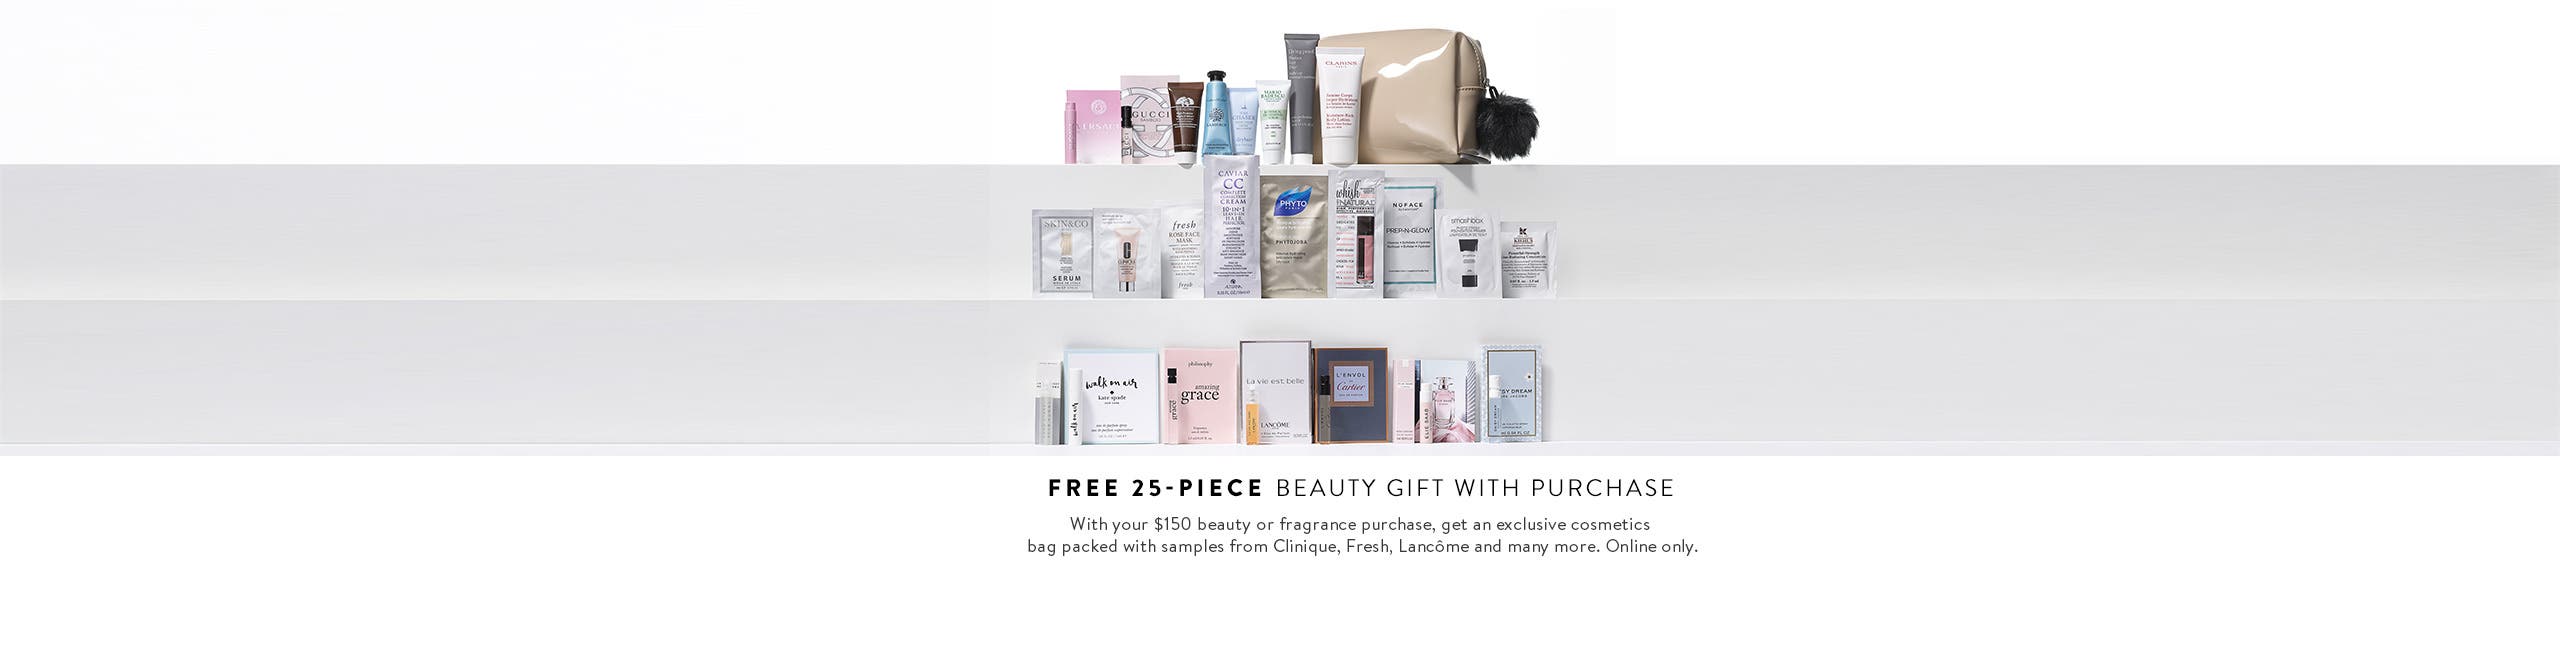 Receive a free 25-piece bonus gift with your $150 Beauty or Fragrance purchase